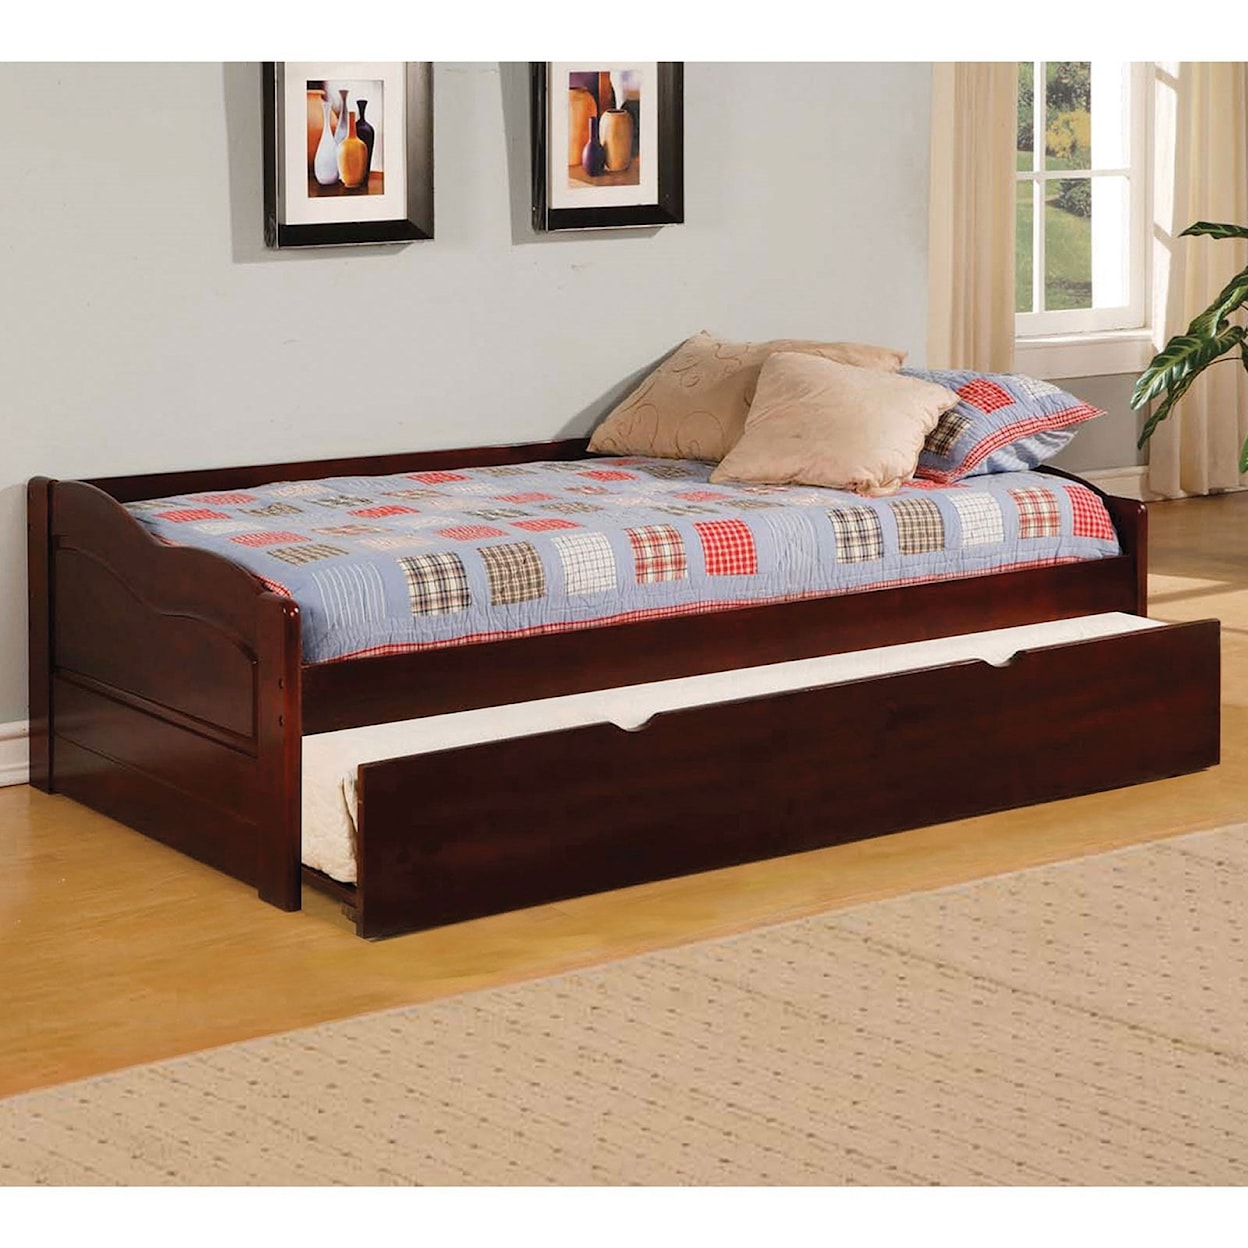 Furniture of America Sunset Daybed with Trundle